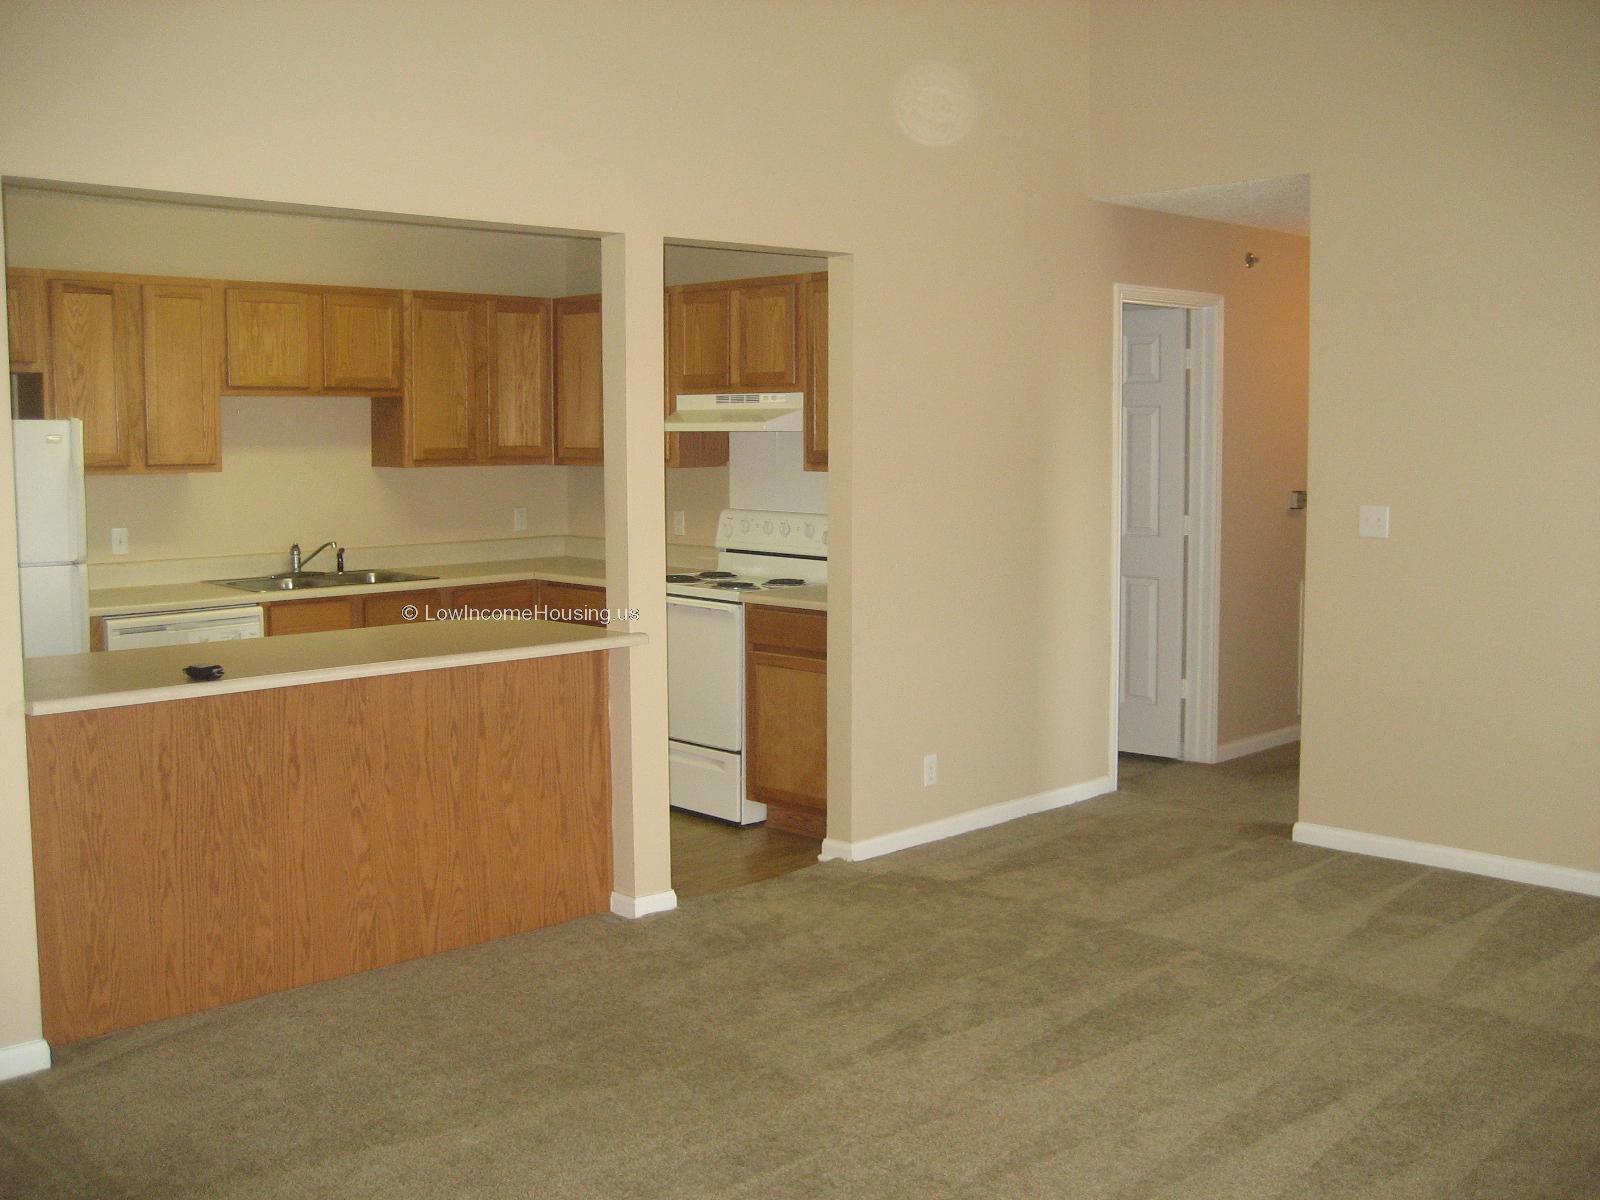 Spacious dining area, complete kitchen with all appliances, access to private living areas.